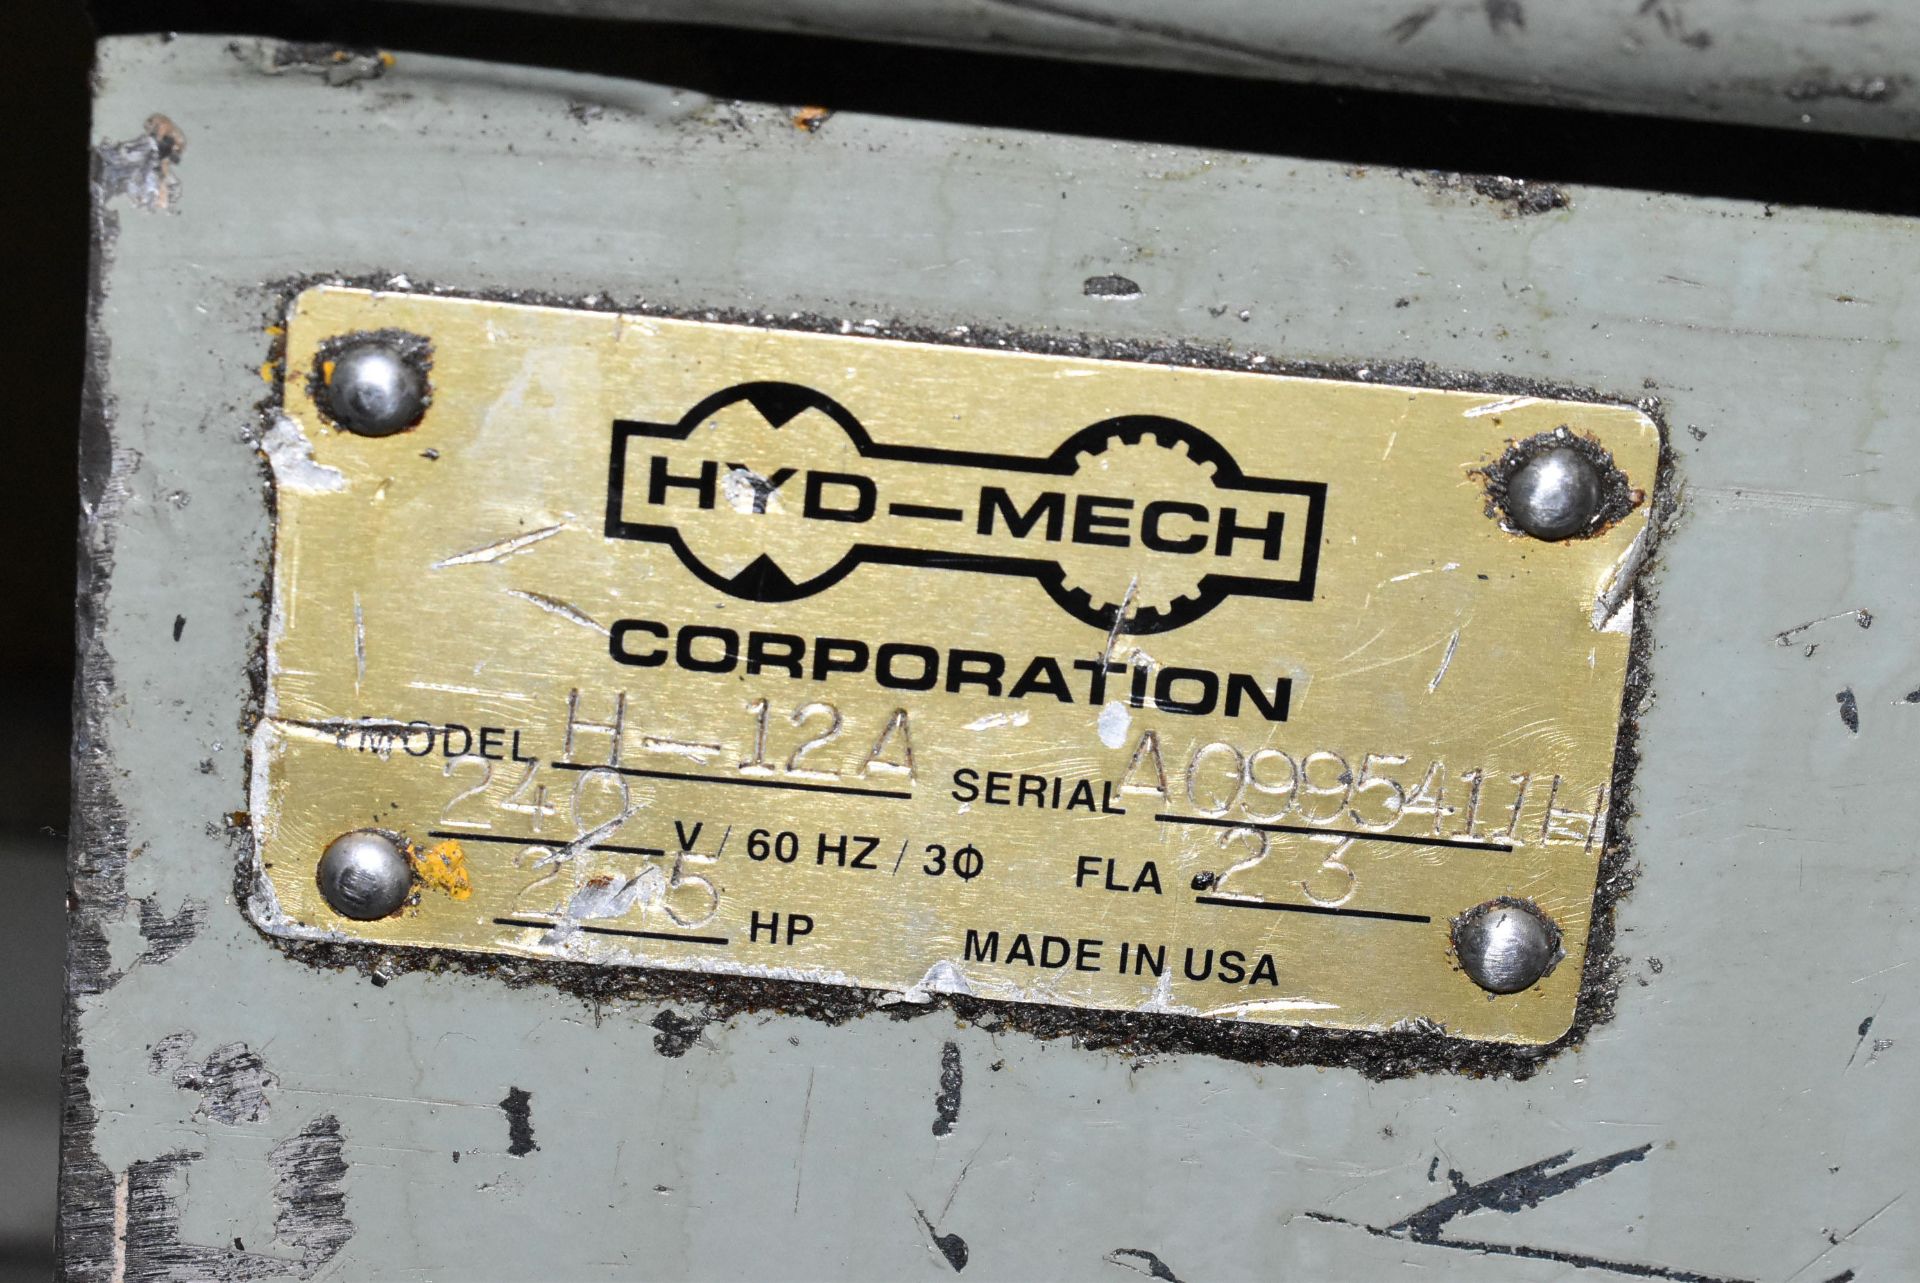 HYD-MECH H-12A AUTOMATIC HORIZONTAL BAND SAW WITH HYD-MECH PLC100 CONTROL, 12"X12" MAX. CAPACITY, - Image 9 of 10